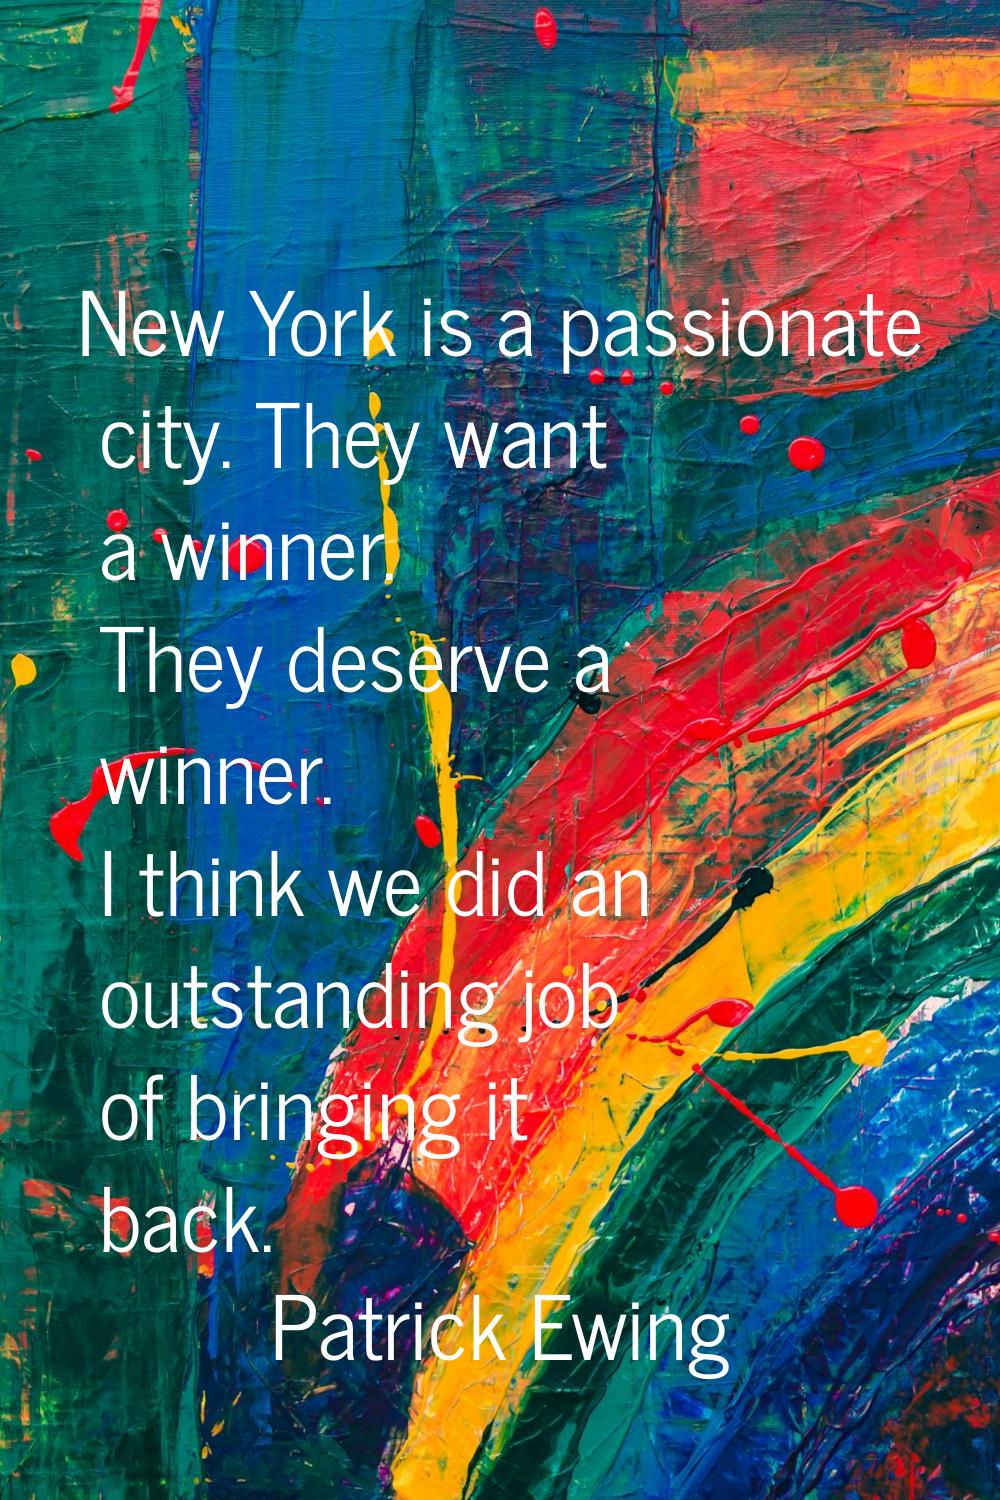 New York is a passionate city. They want a winner. They deserve a winner. I think we did an outstan